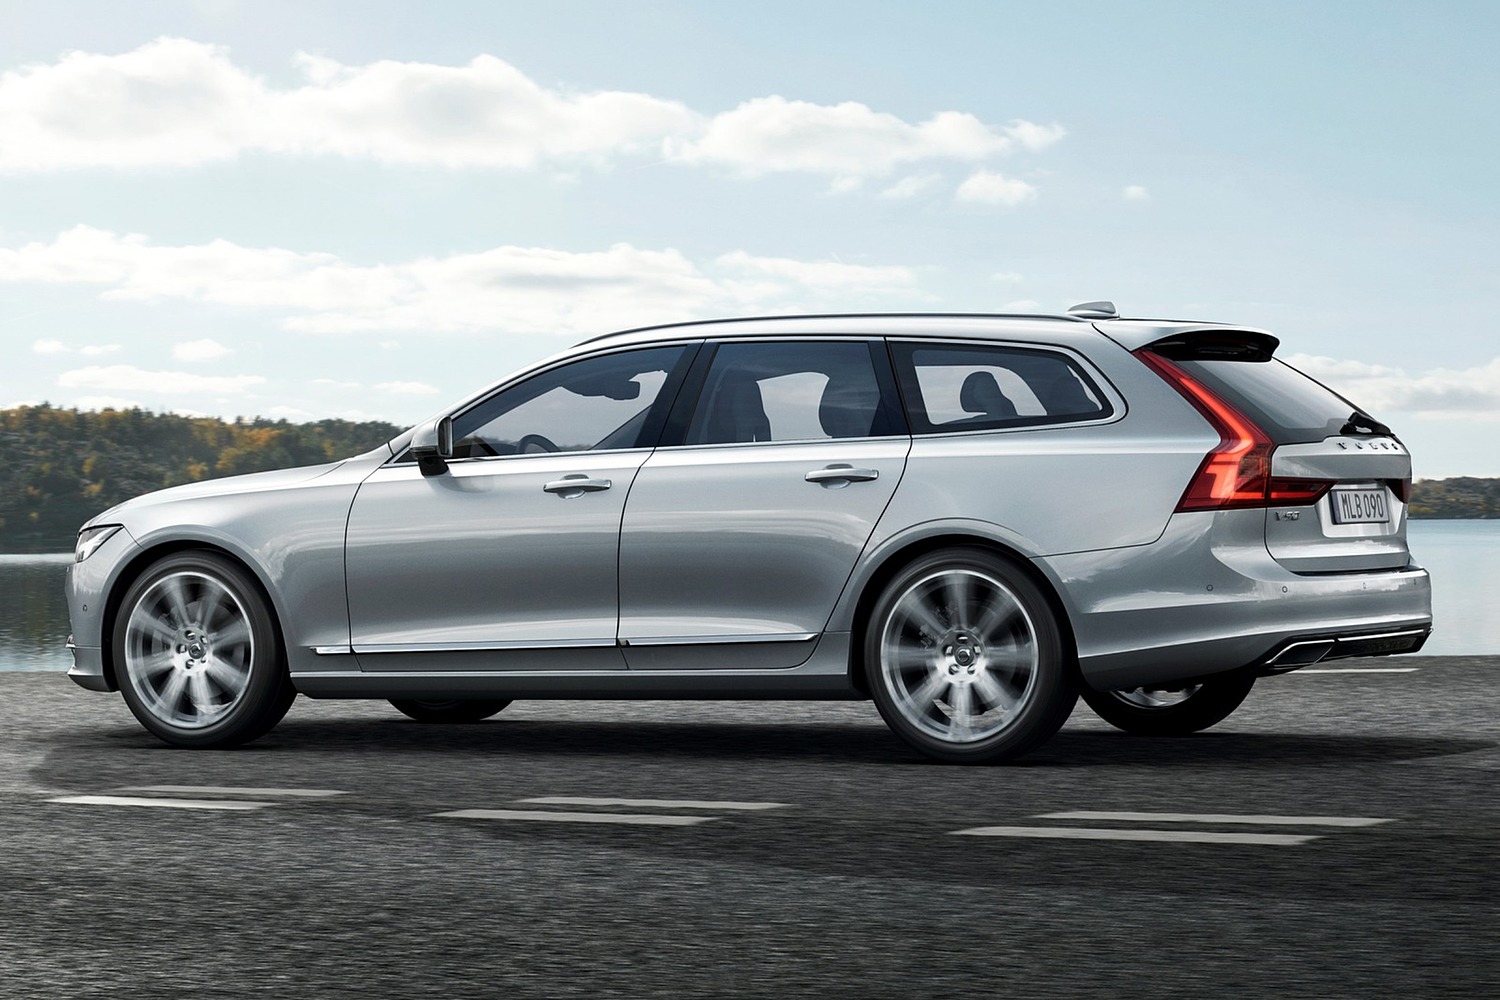 2018 Volvo V90 Wagon Exterior. Target Launch Spring 2017.